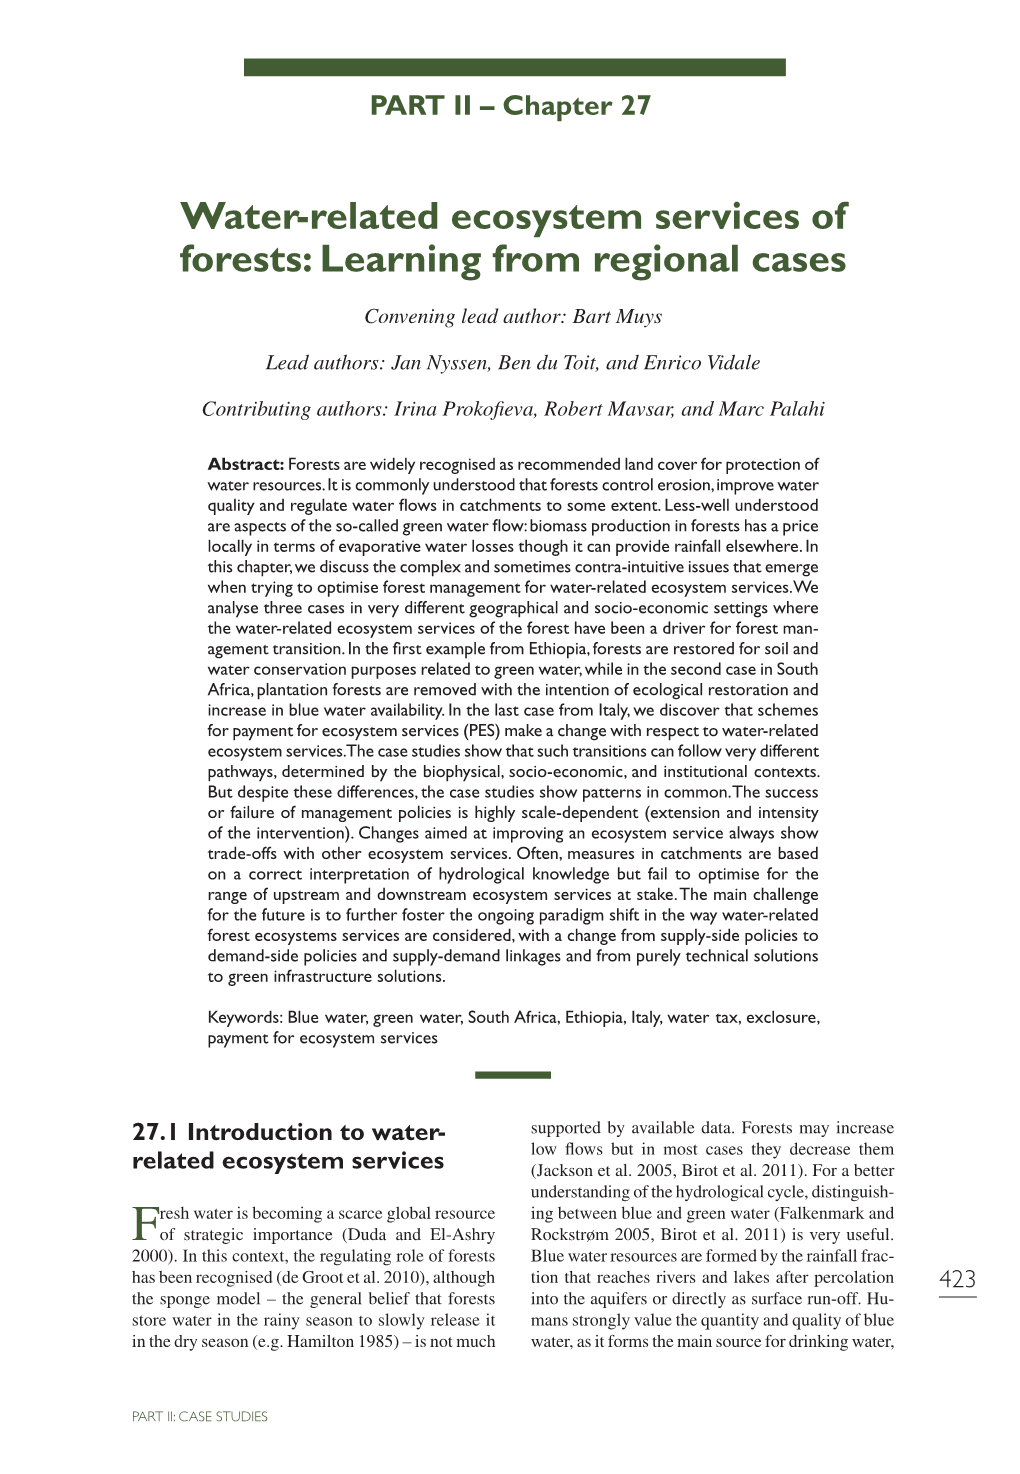 Water-Related Ecosystem Services of Forests: Learning from Regional Cases